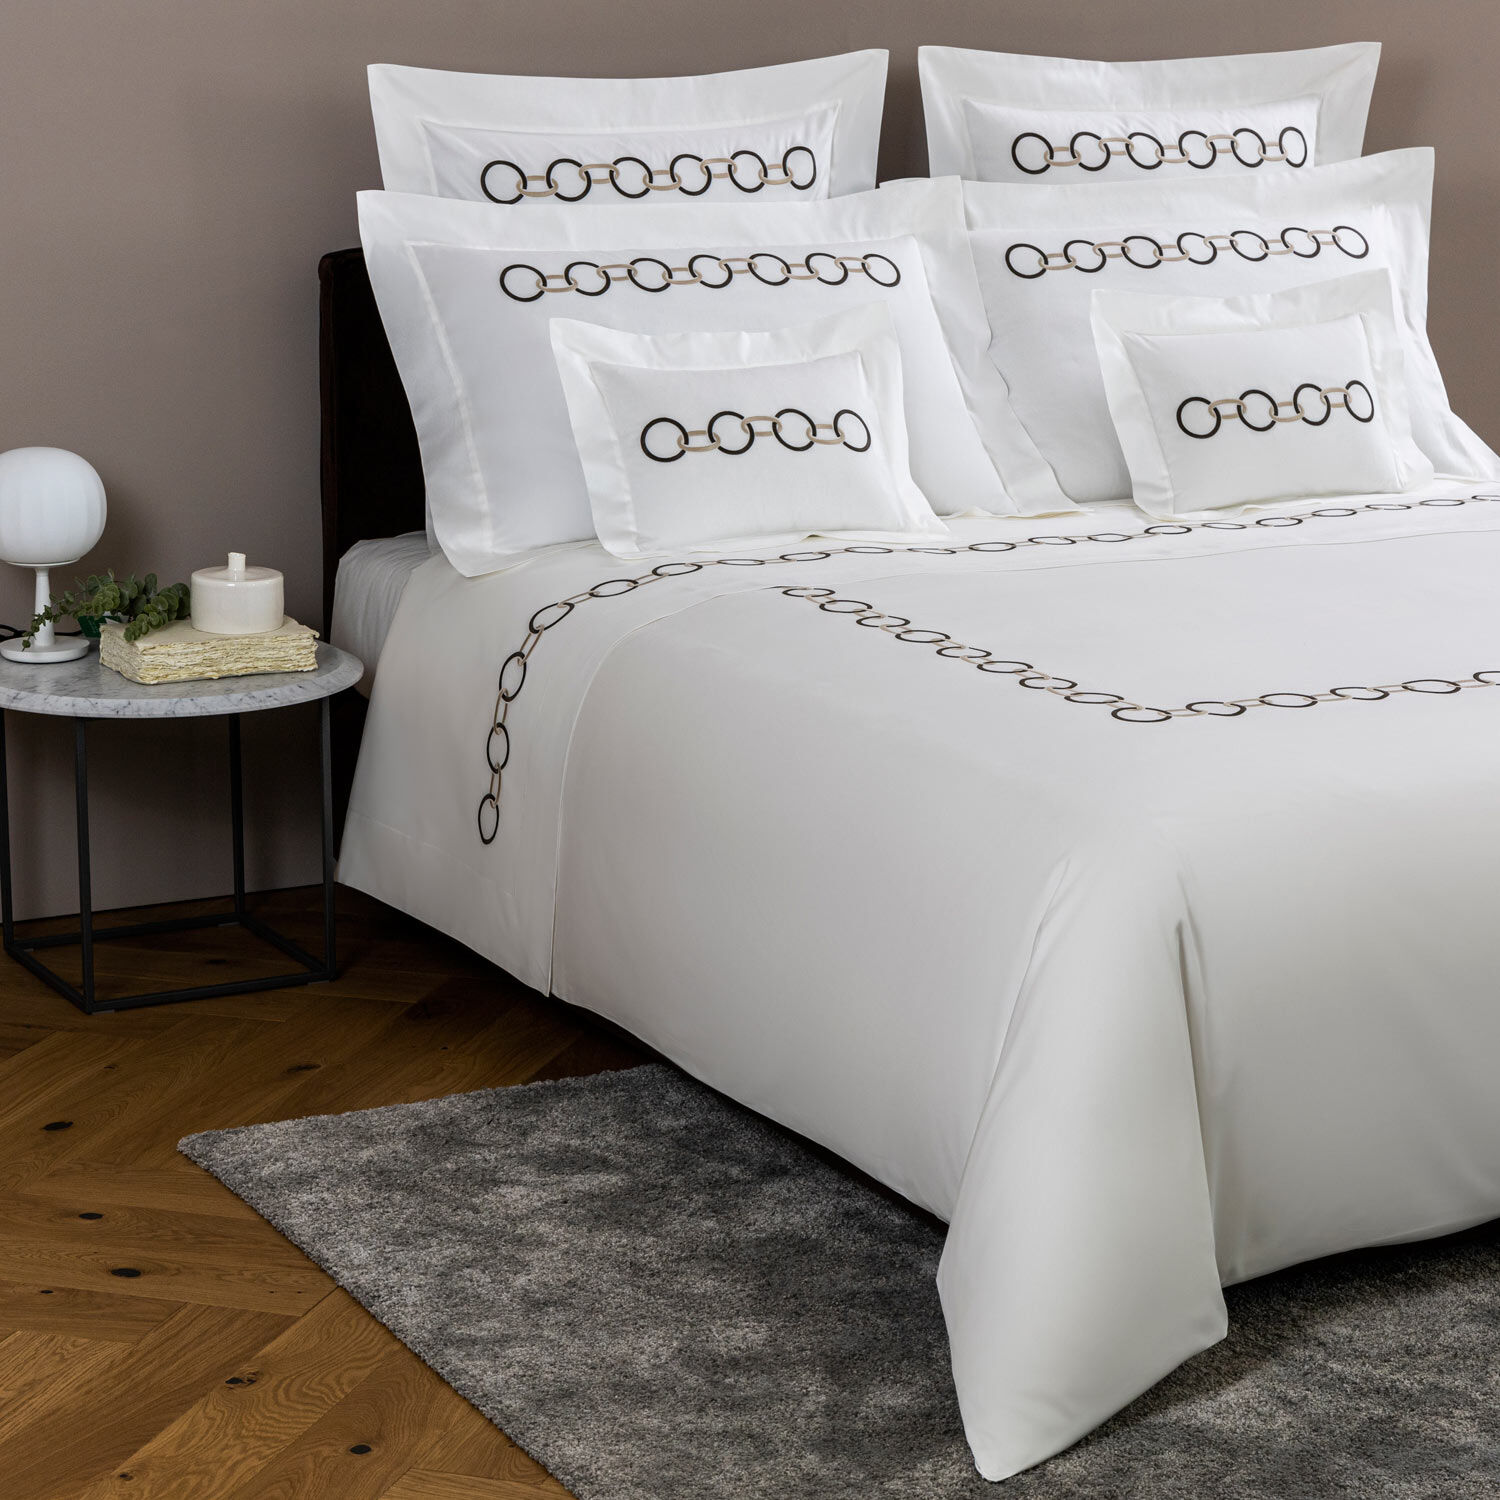 Details about   $1000 Frette Sfere Ricamo Pair Euro Shams Ivory Embroidered Circles 2 Available 